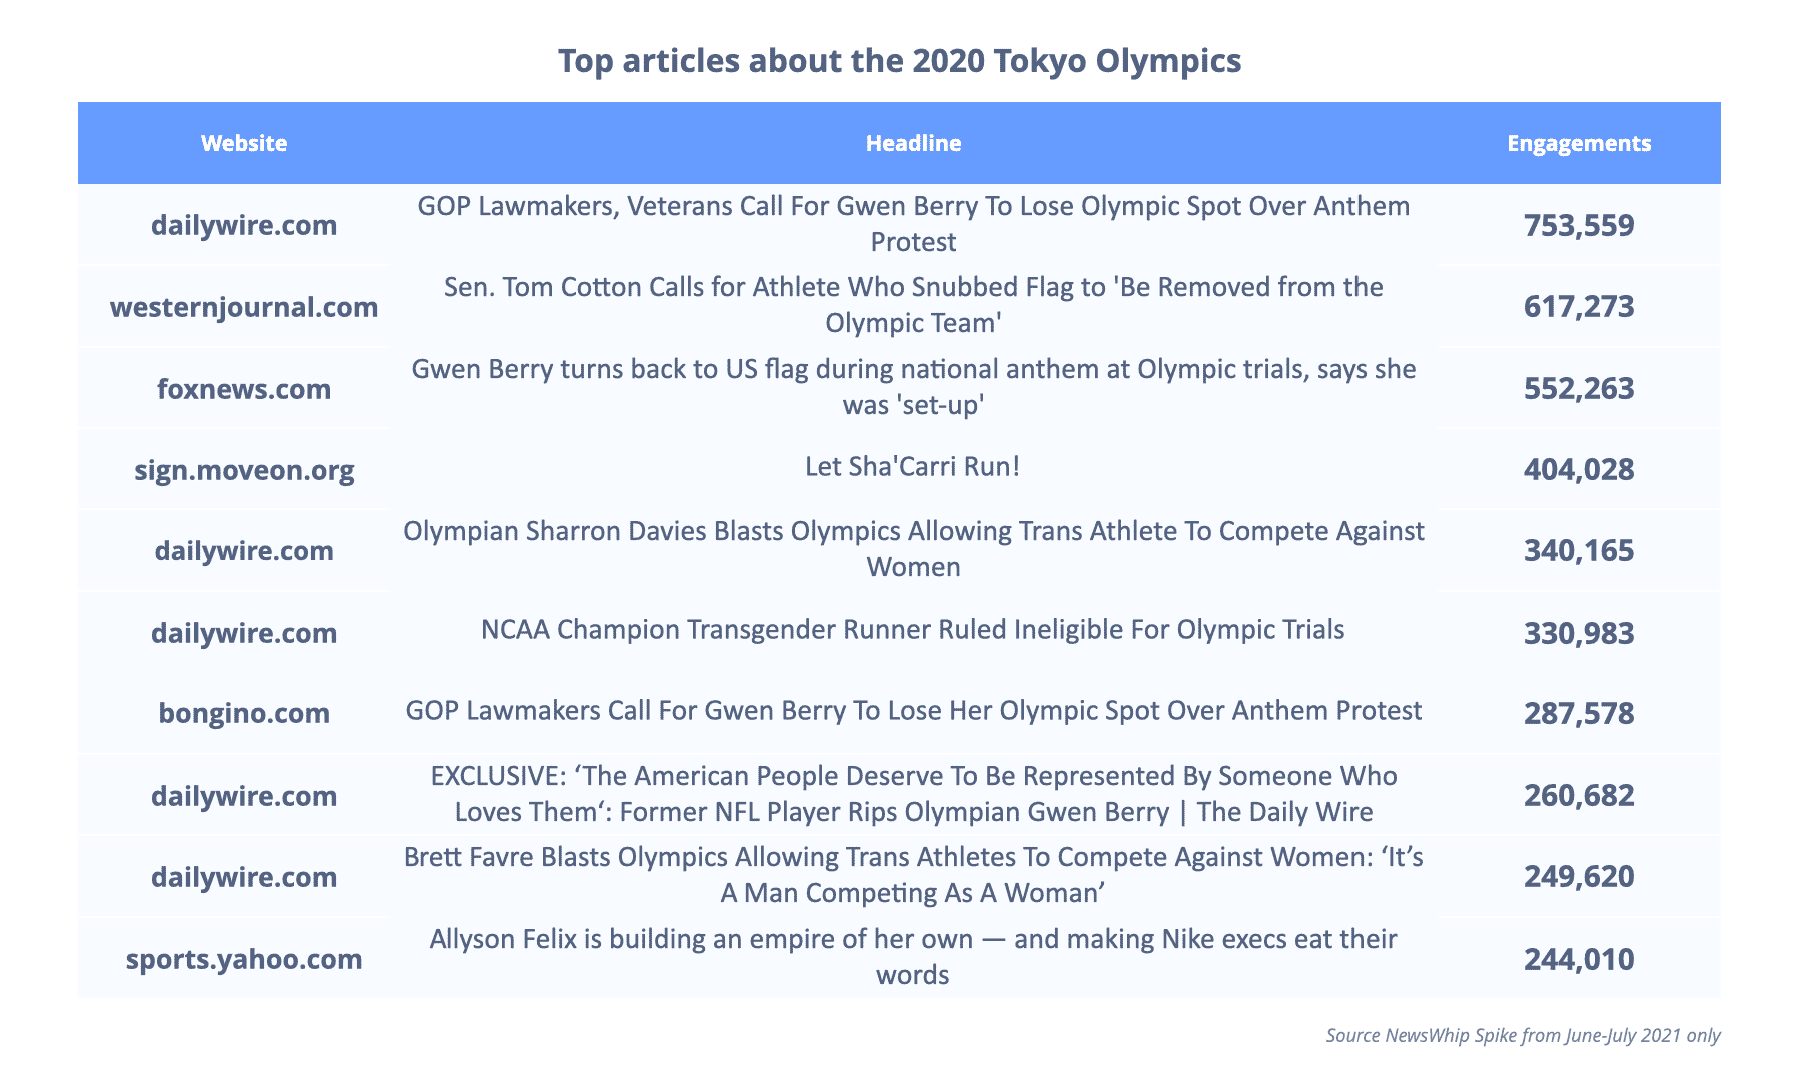 Chart showing the most engaged articles about the Tokyo Olympics